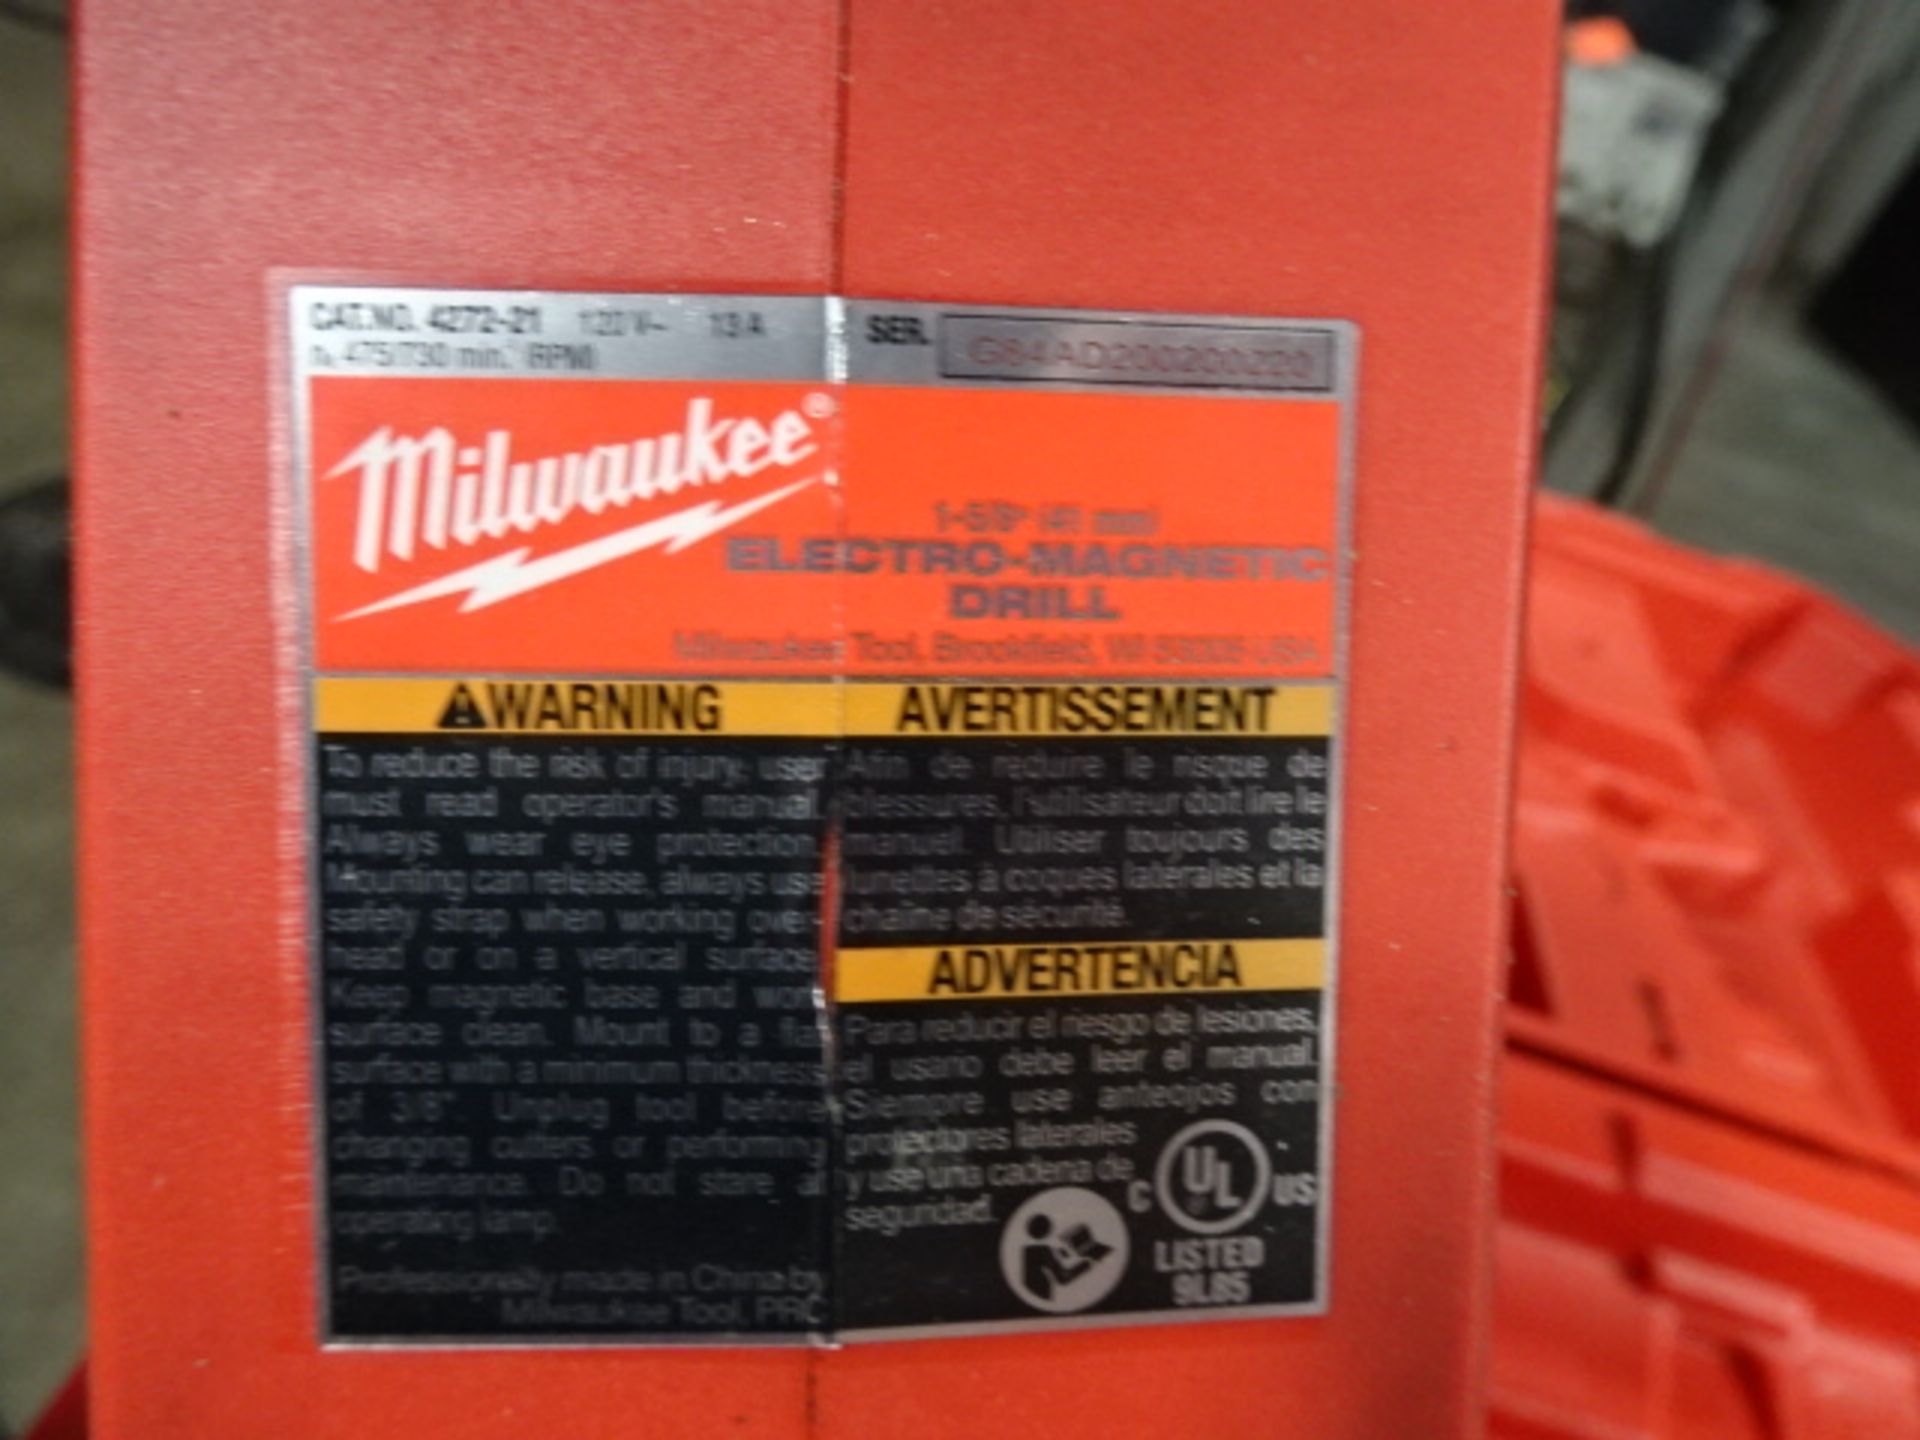 Milwaukee Electro-Magnetic Drill - Image 3 of 3